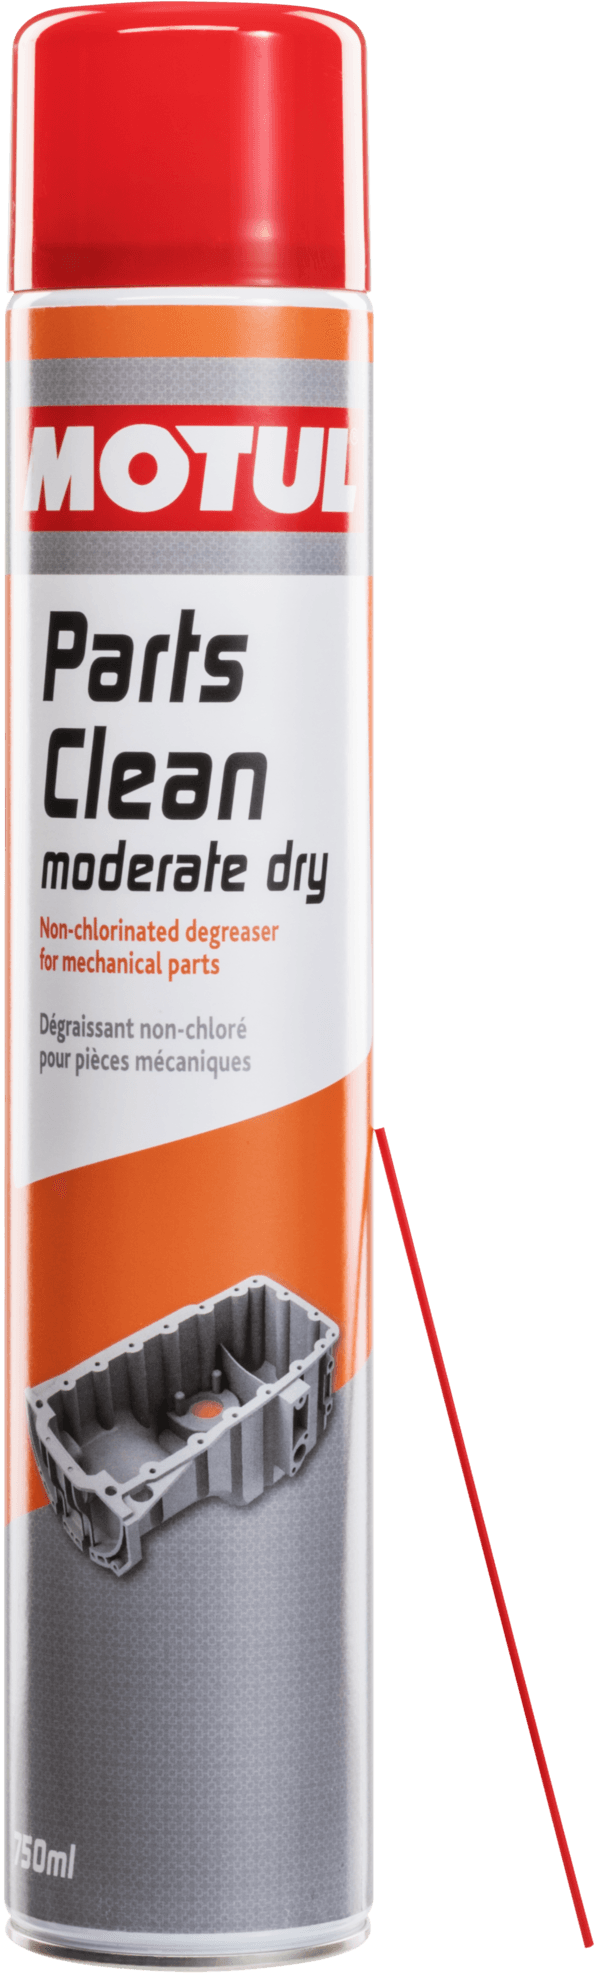 MOTUL PARTS CLEAN MODERATE DRY